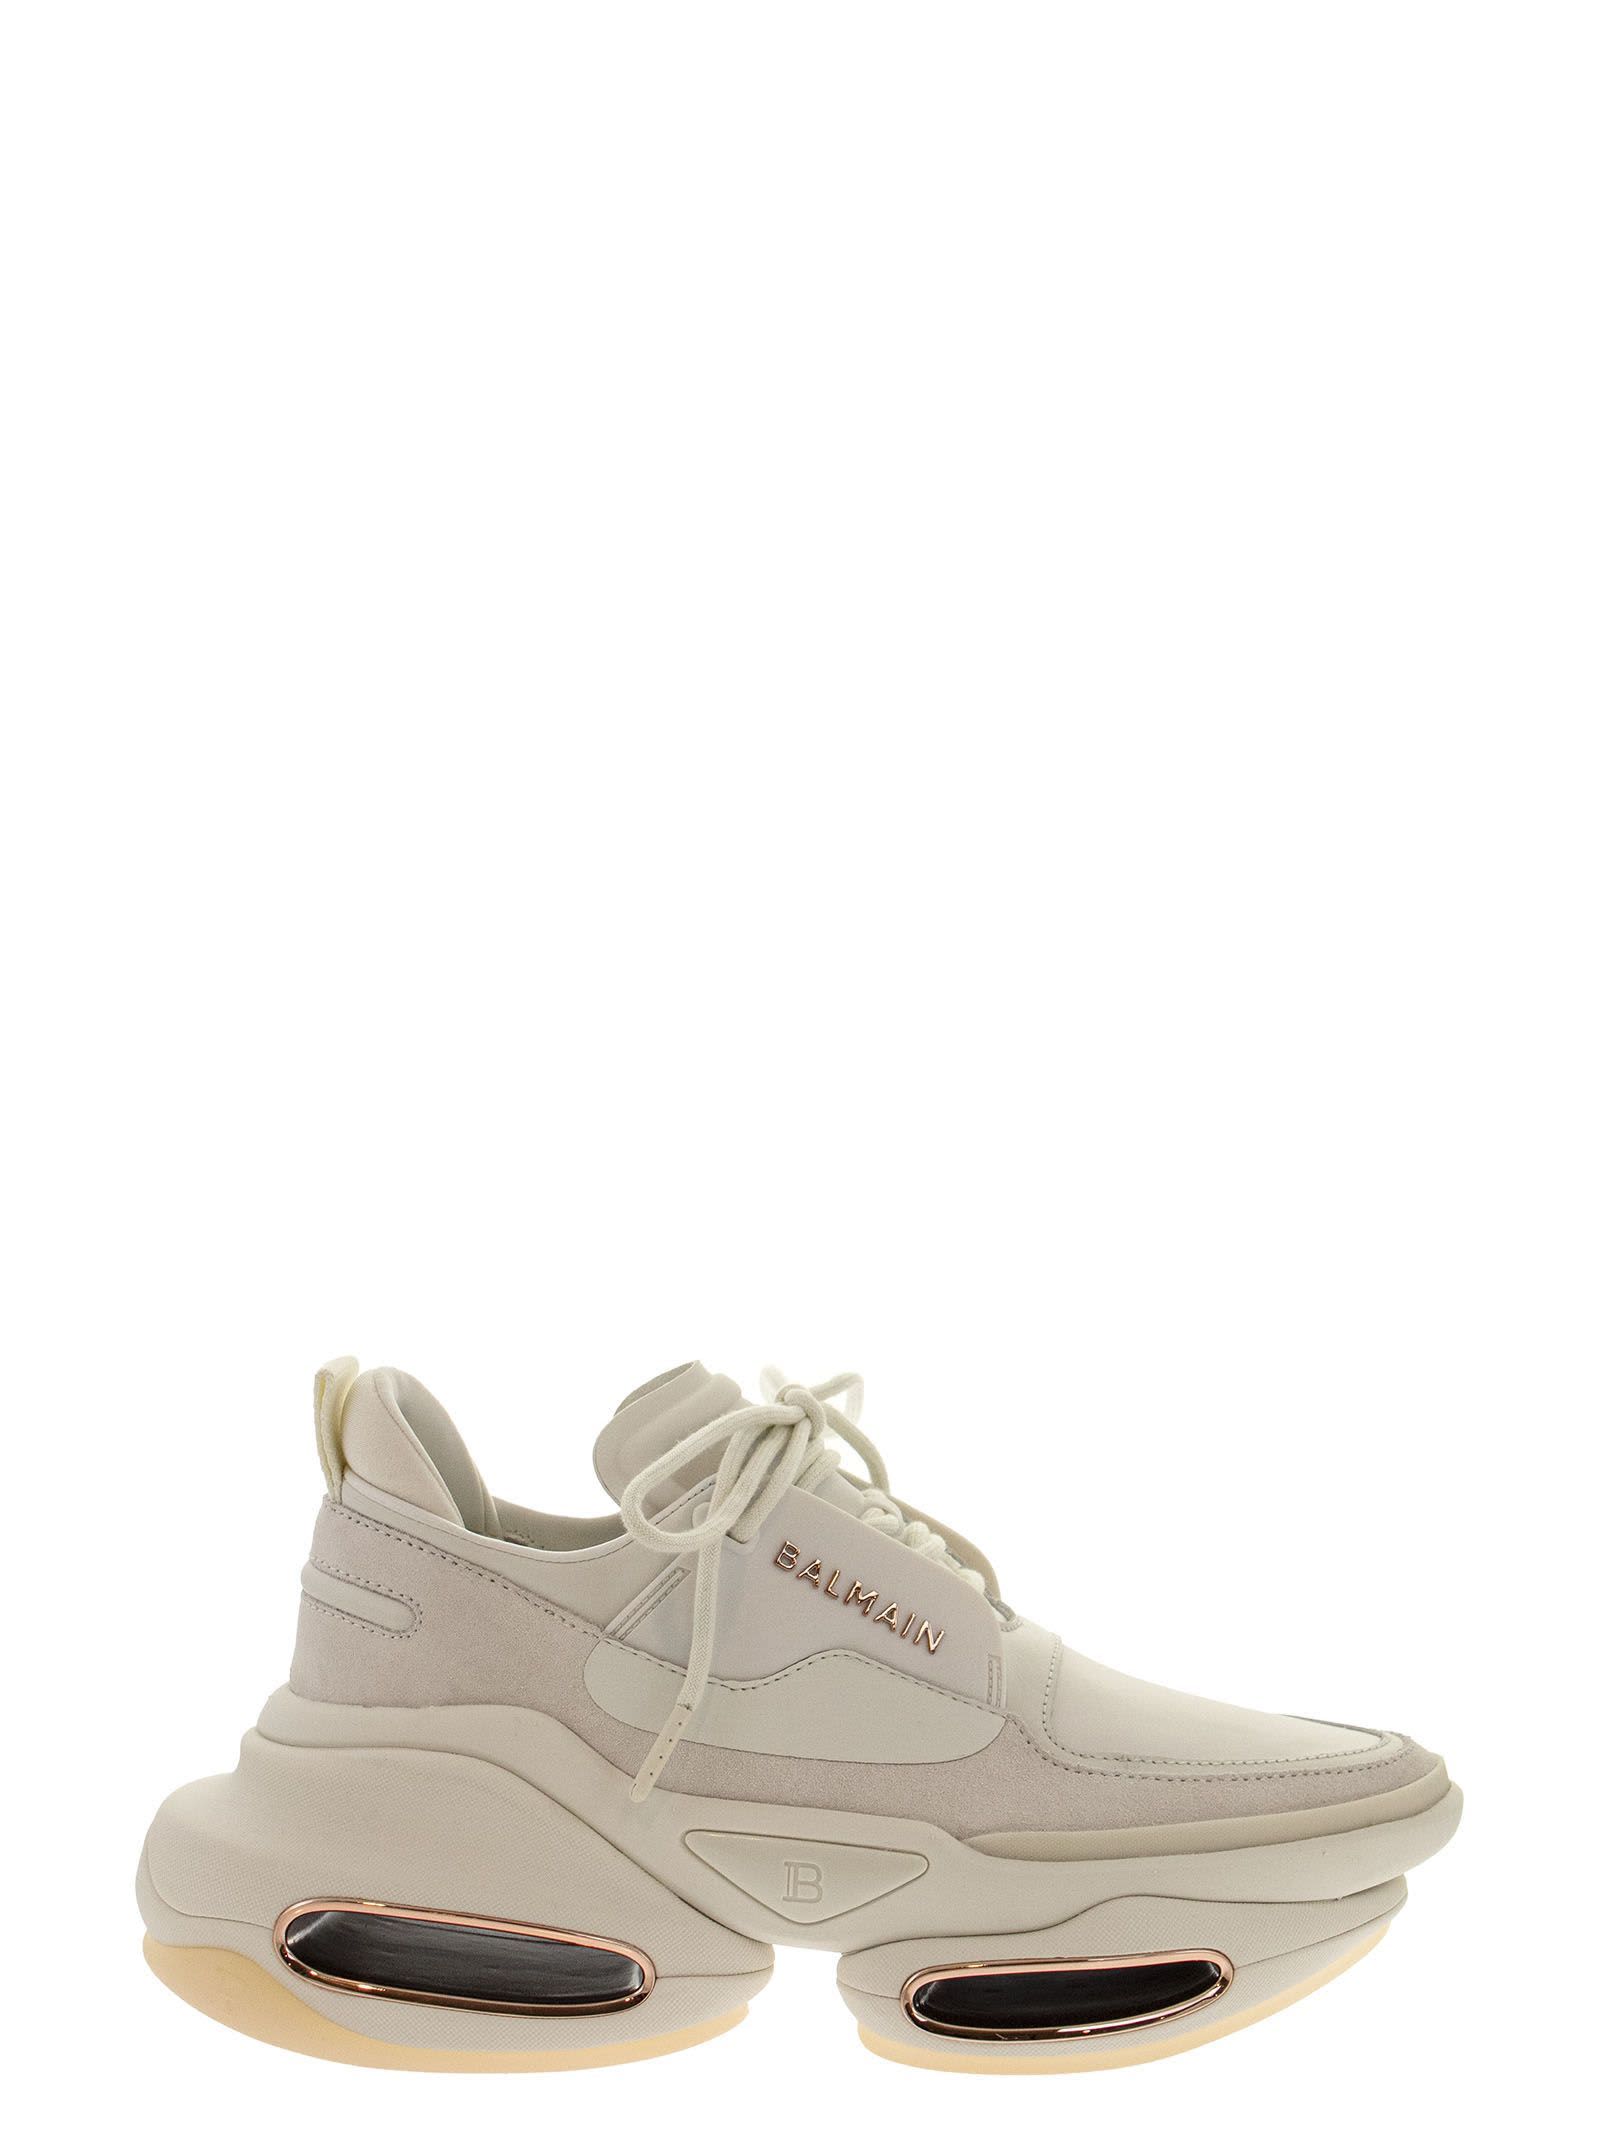 Balmain B-bold Leather And Suede Sneakers